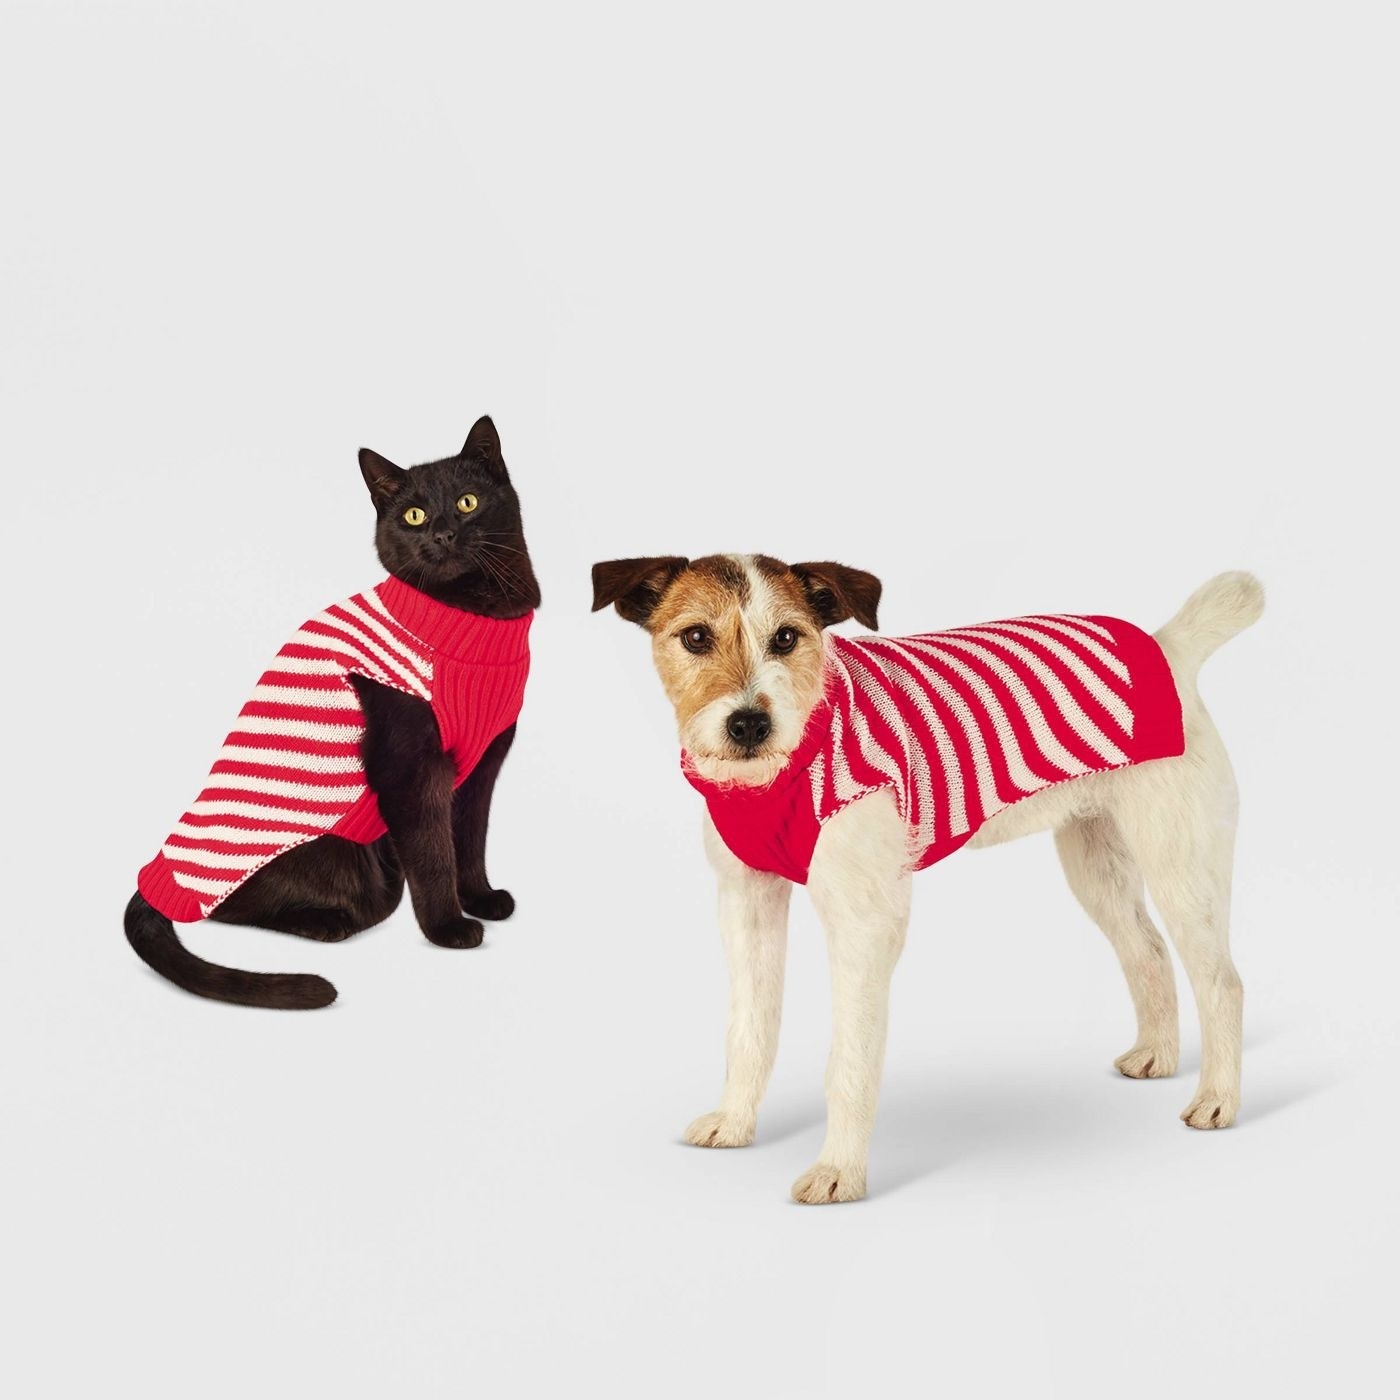 A dog and a cat each model the sweater.